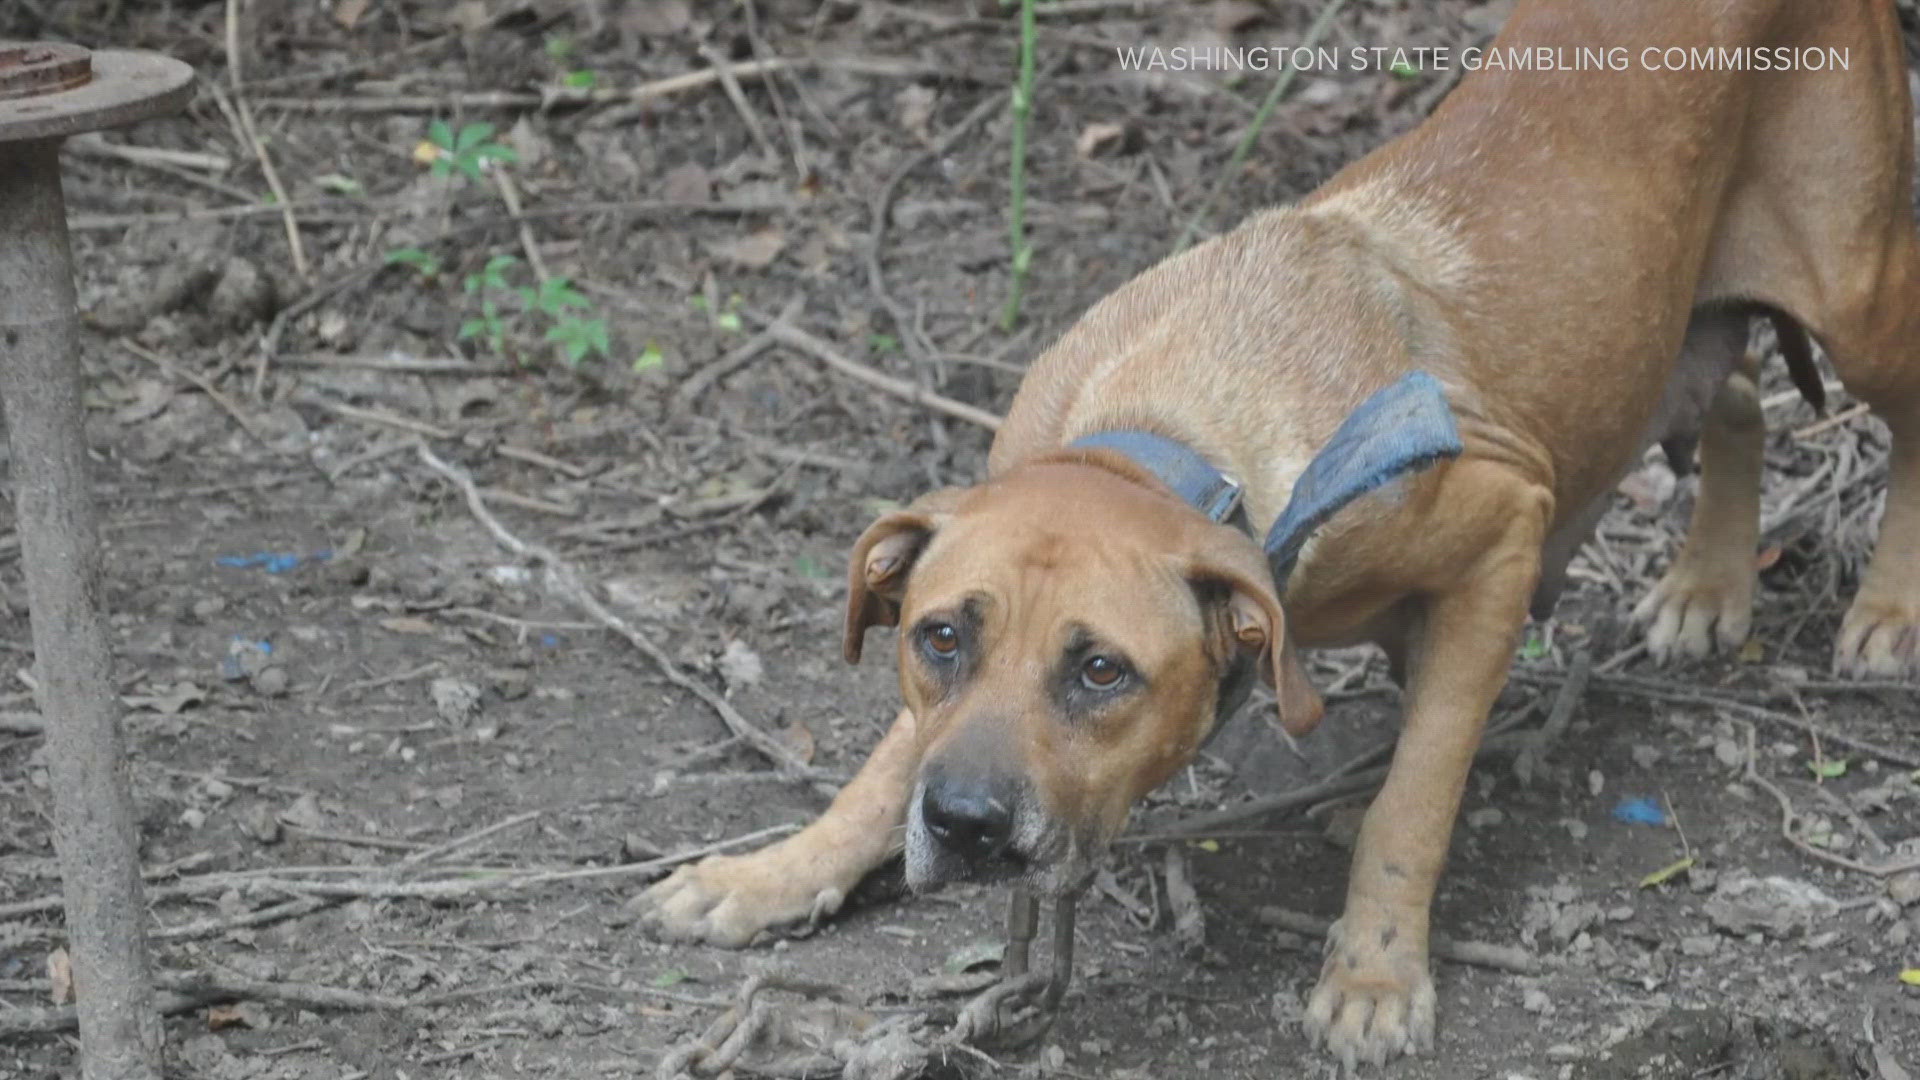 Prosecutors will be able to file felony charges for all involved animals in cruelty cases.